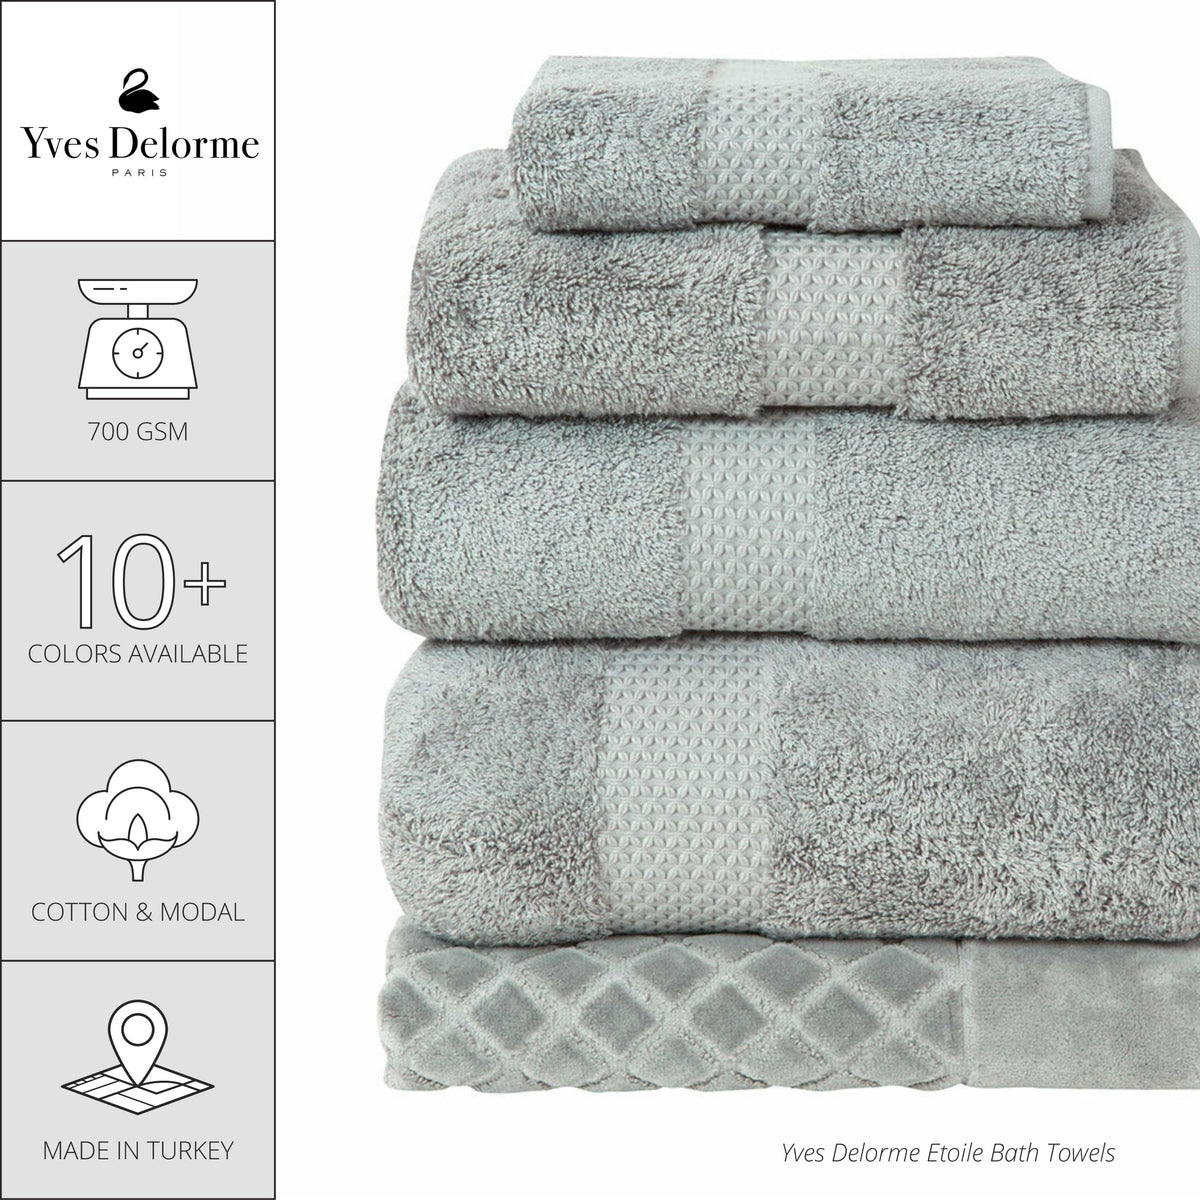 Yves Delorme Etoile Bath Towels and Mats - Platine